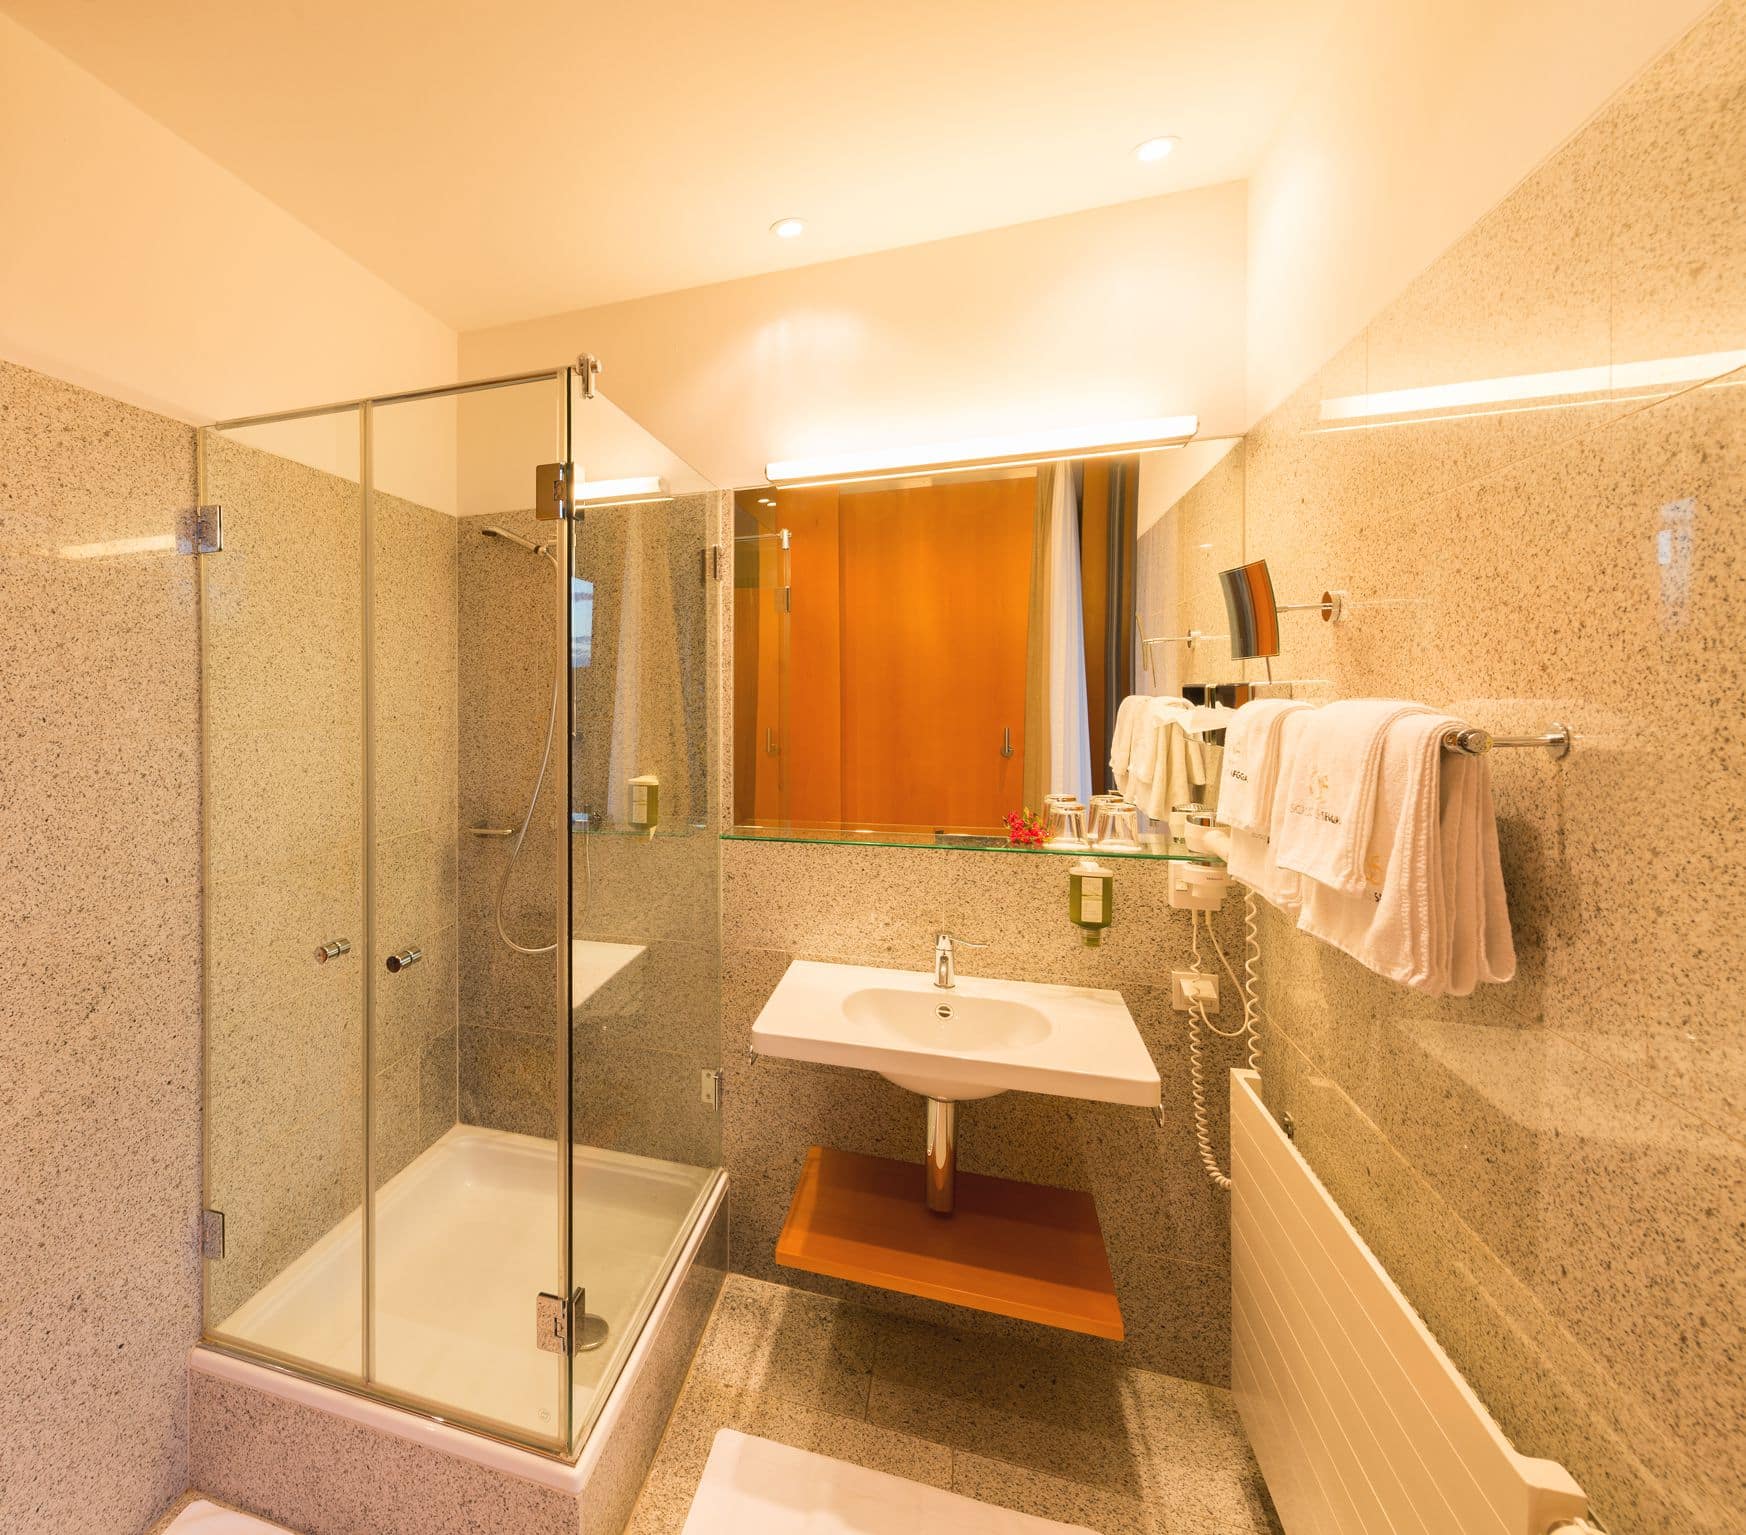 Modern comfort double room bathroom with shower, bathroom sink, mirrow and tower holder